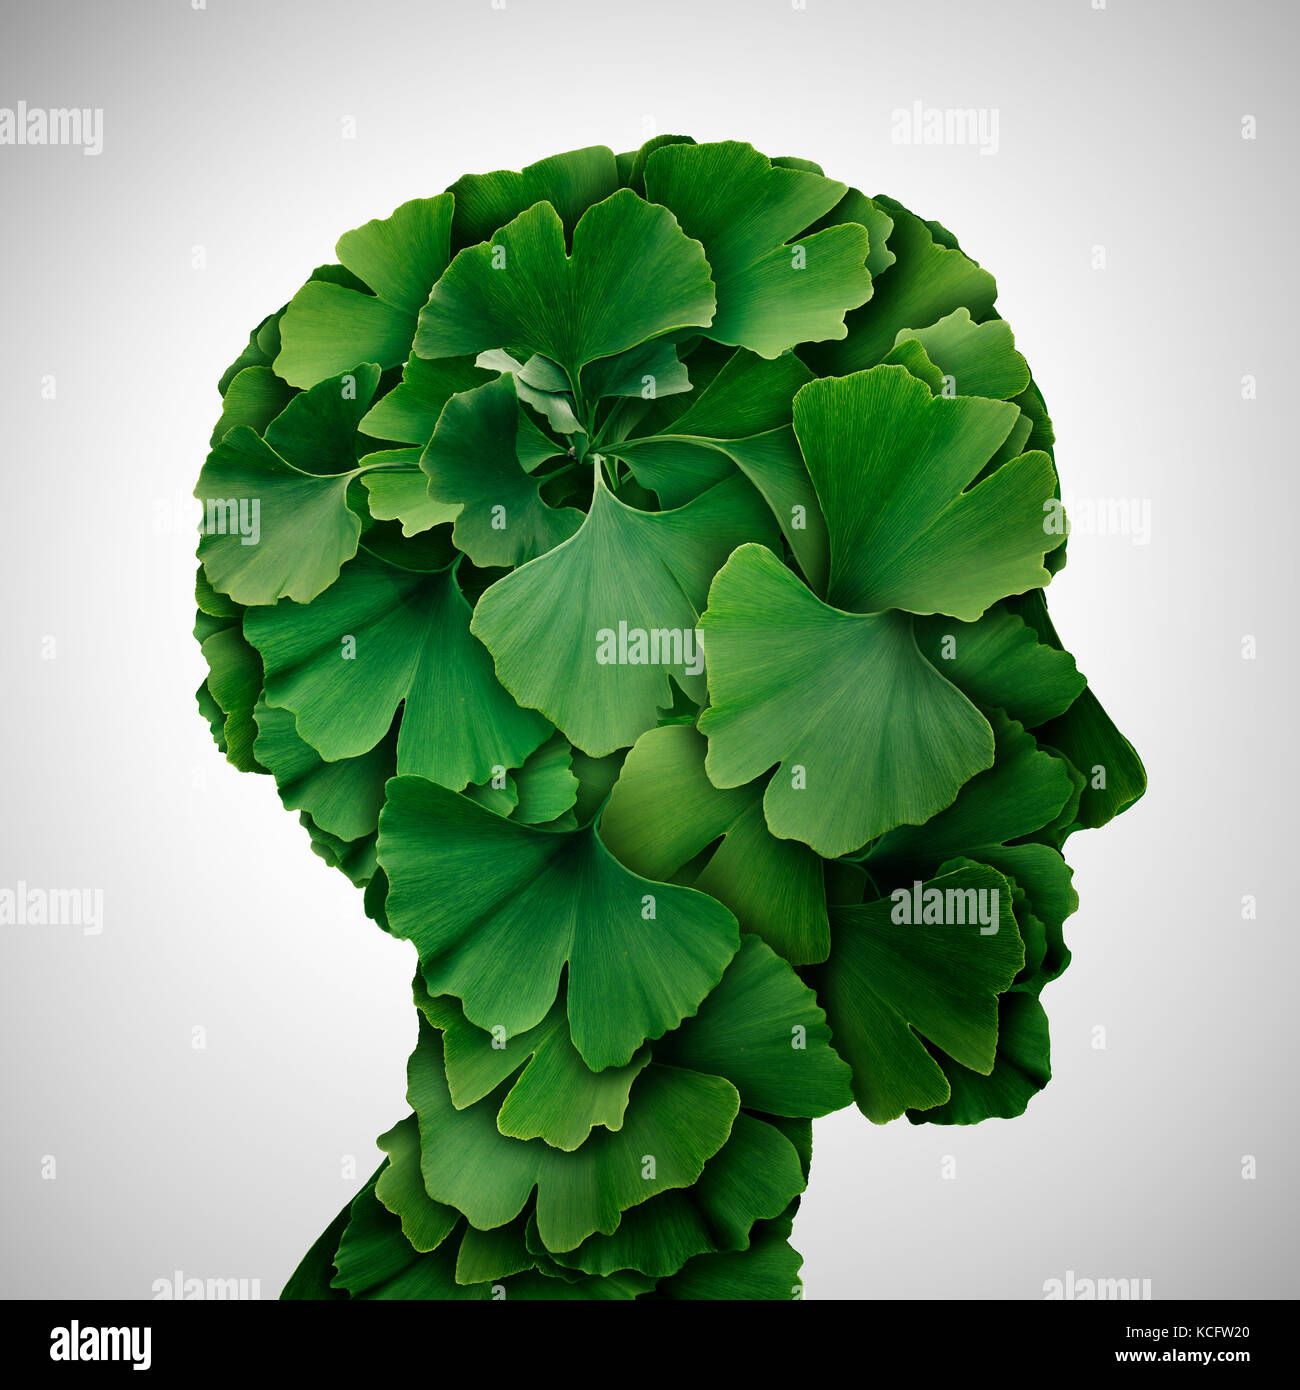 Ginkgo Biloba leaf head as a herbal medicine concept and natural phytotherapy medication symbol for healing as leaves shaped as a human. Stock Photo